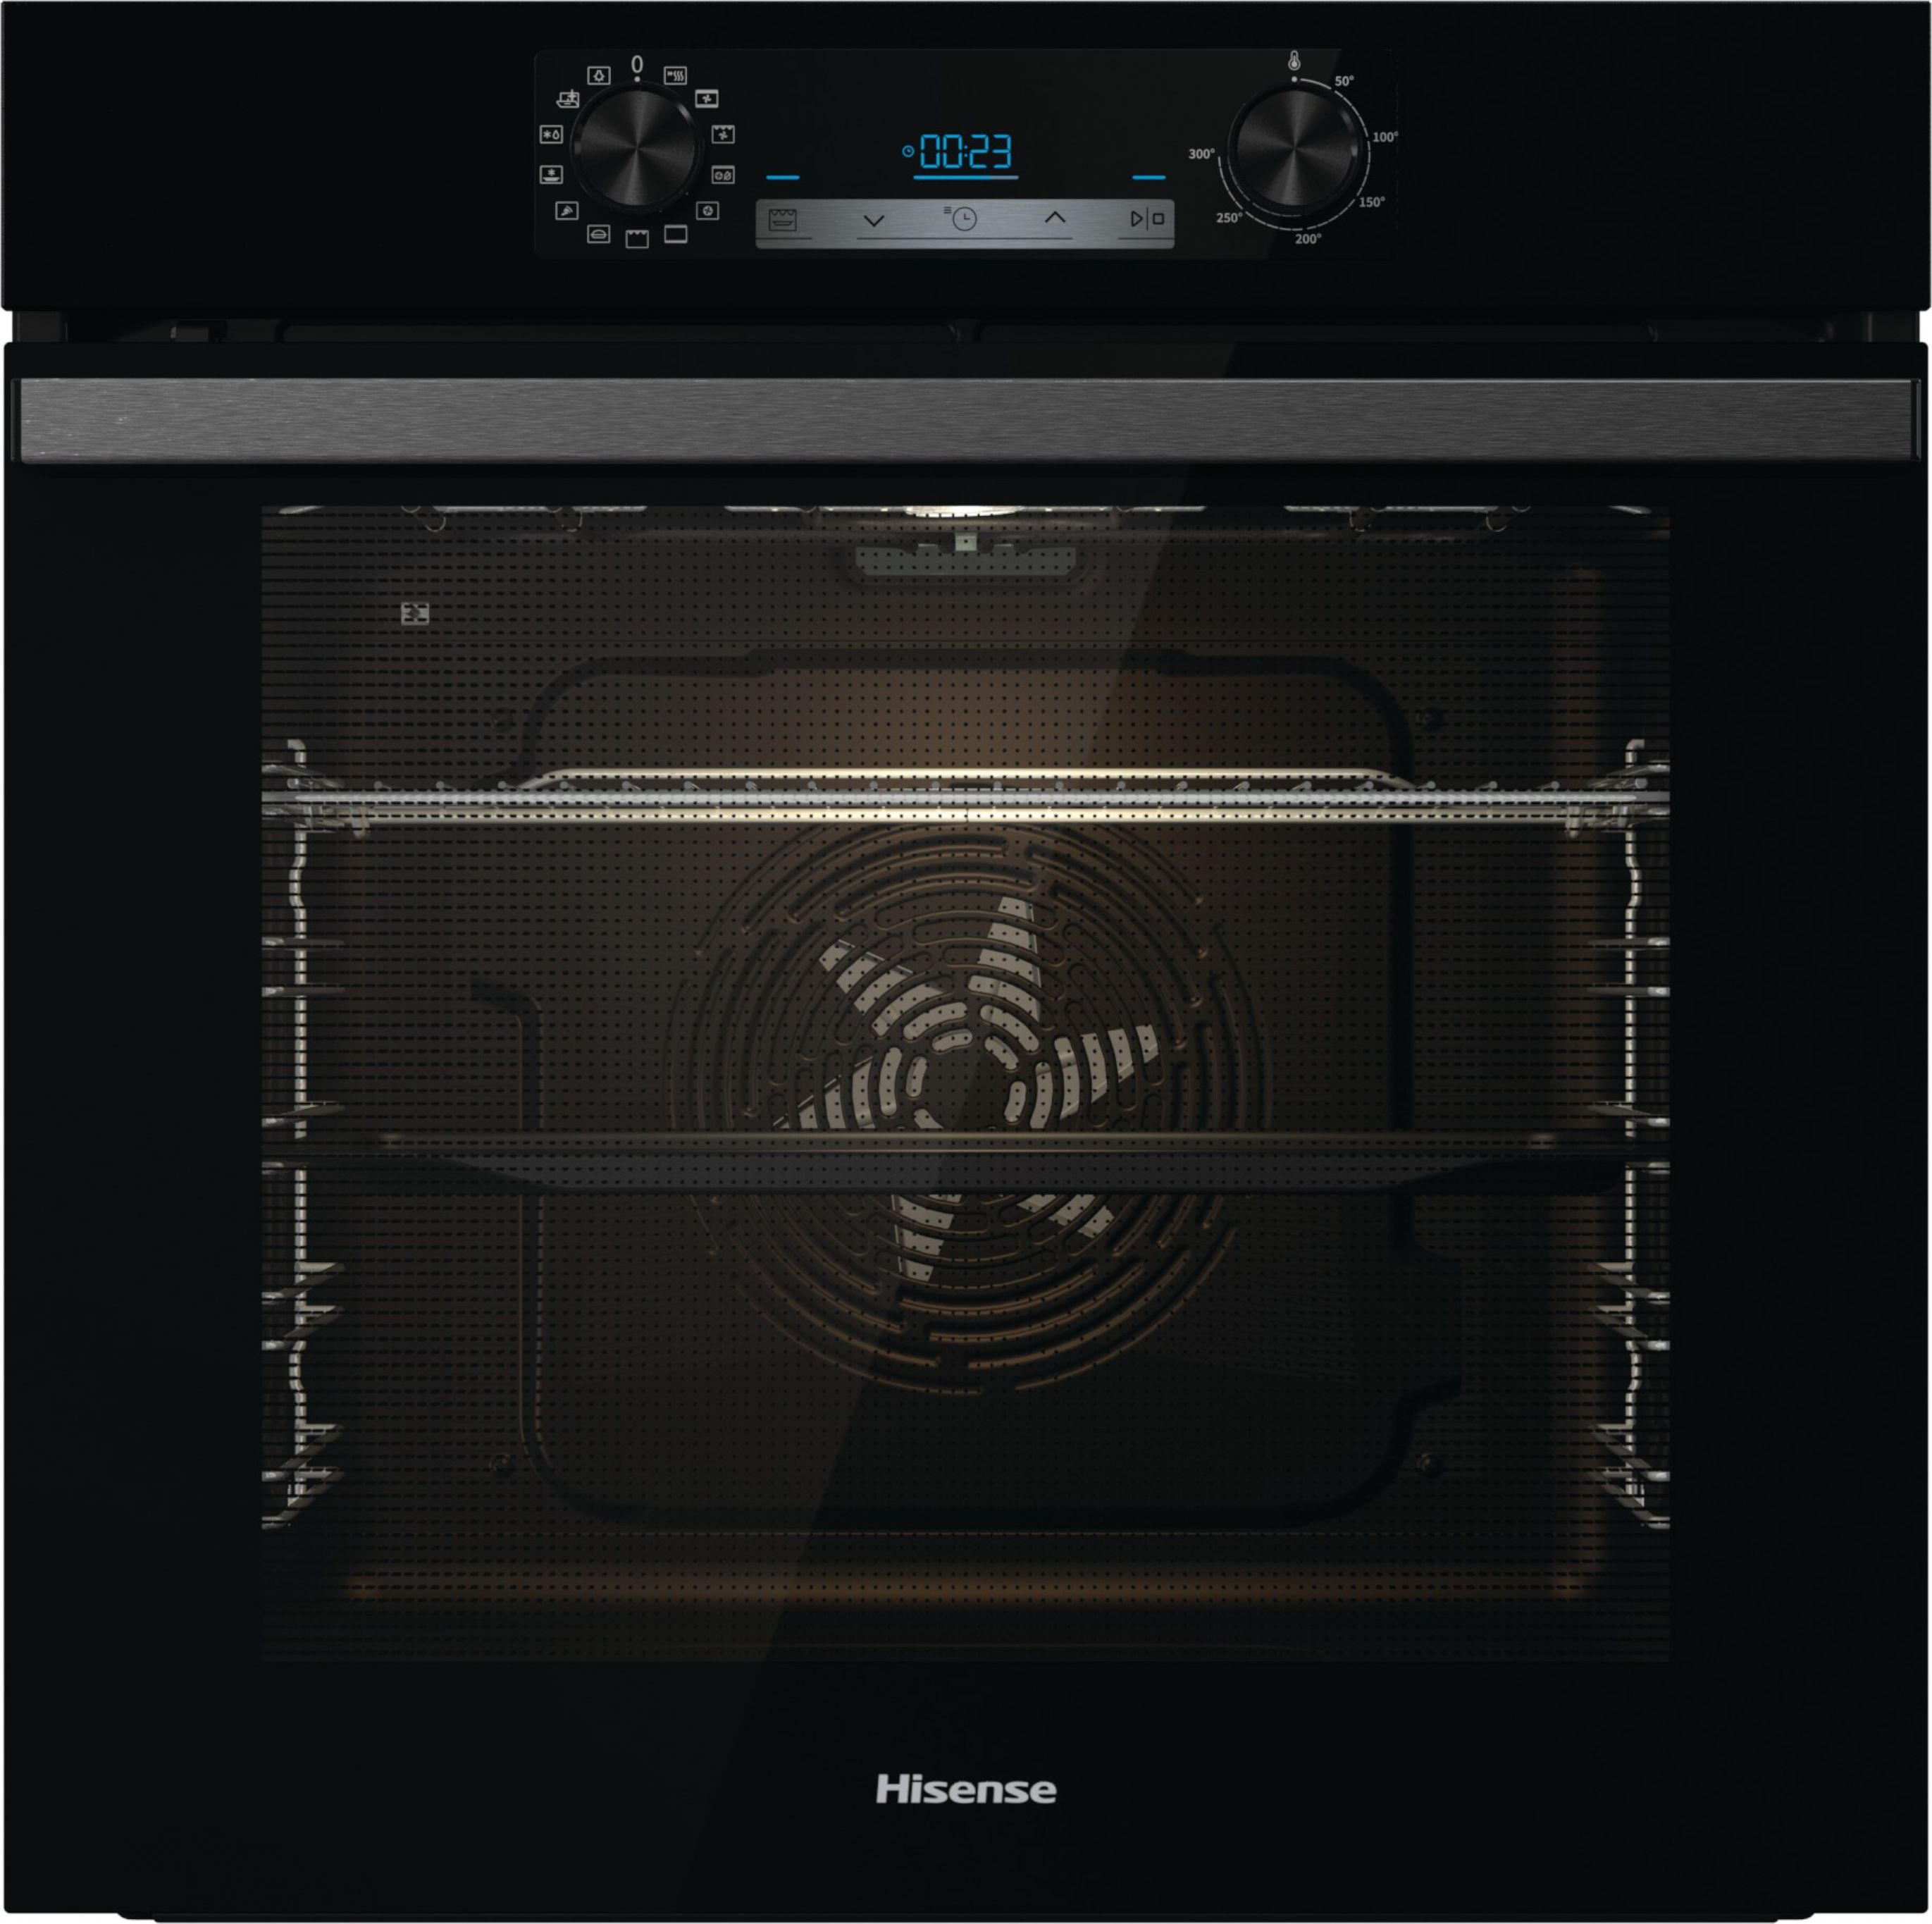 Hisense BI64211PB Built In Electric Single Oven with Pyrolytic Cleaning - Black - A+ Rated, Black